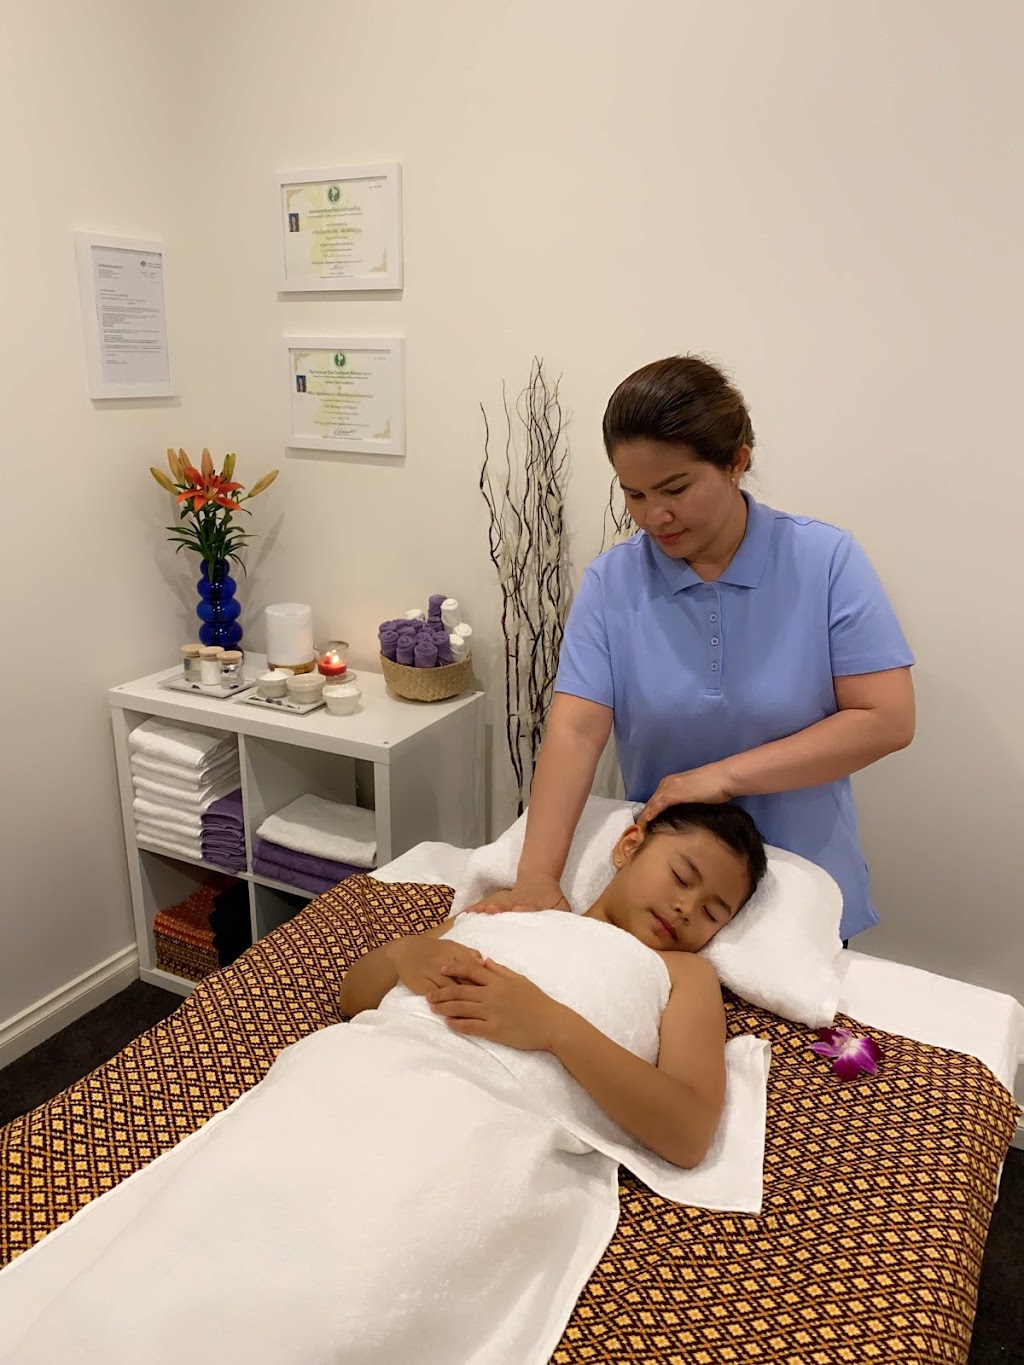 Khing Thai Massage Therapy |  | 1A McLeod St, Doncaster VIC 3108, Australia | 0404304771 OR +61 404 304 771